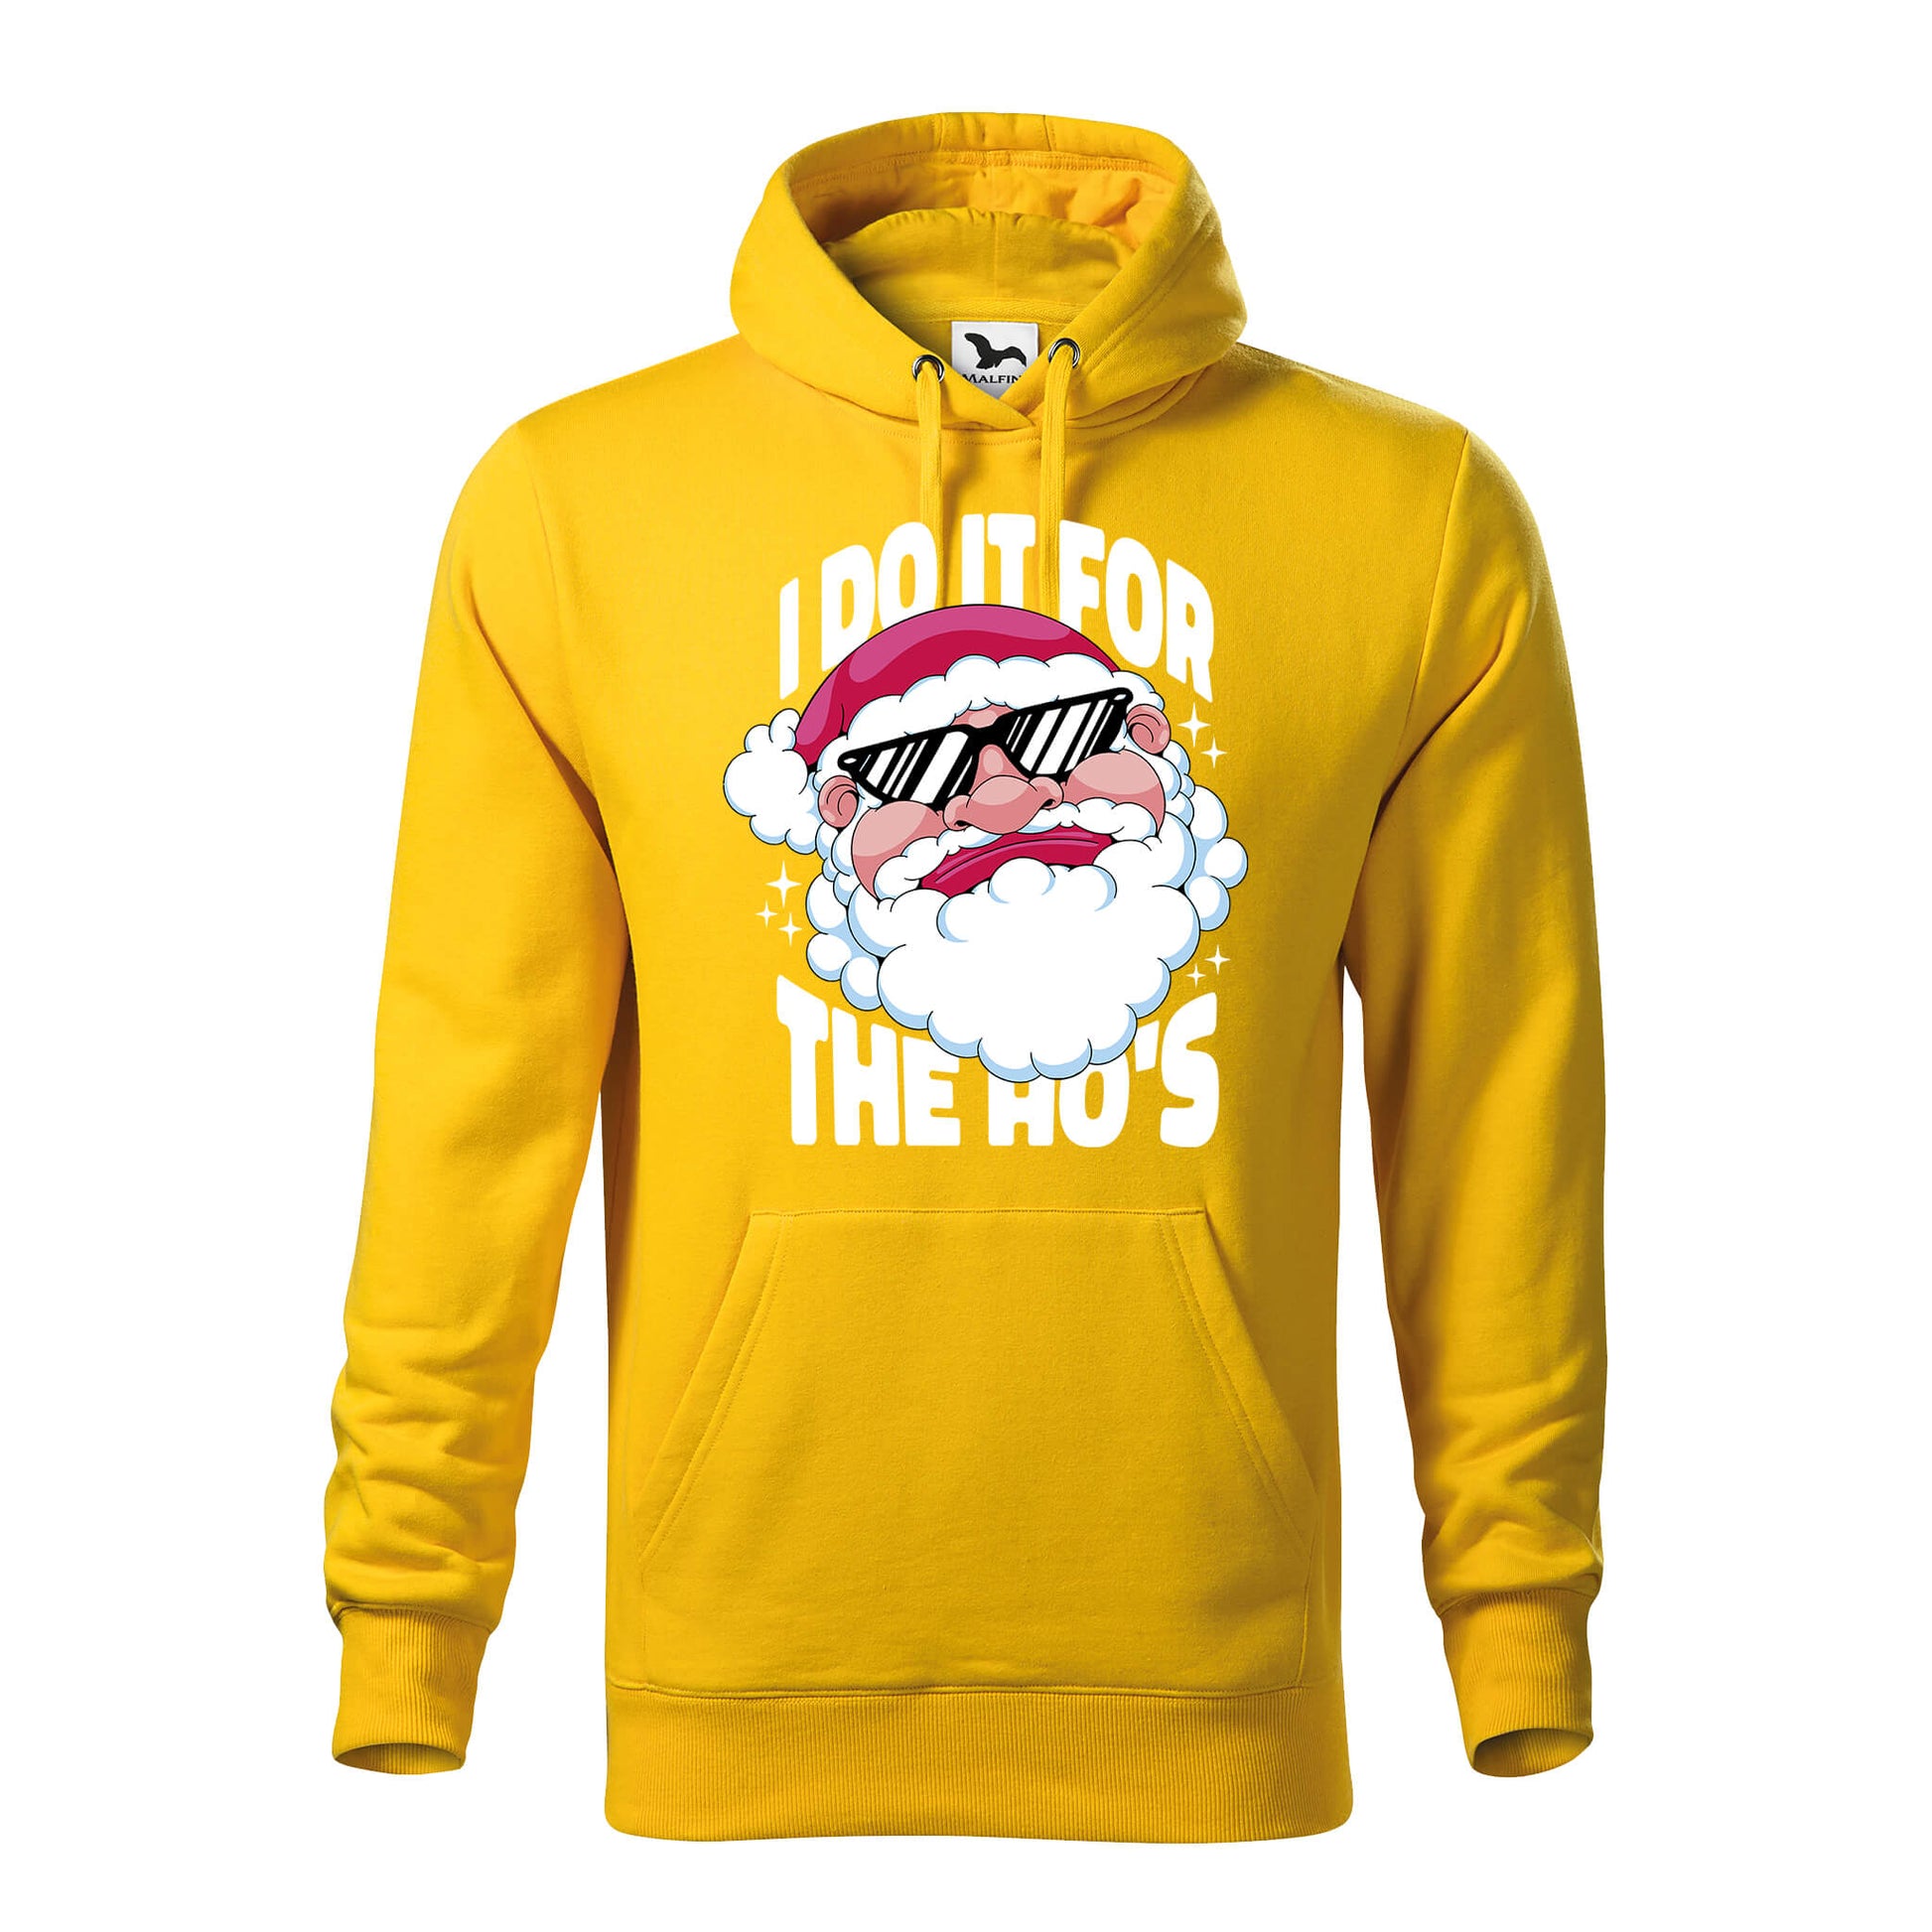 I do it for the hoes santa hoodie - rvdesignprint